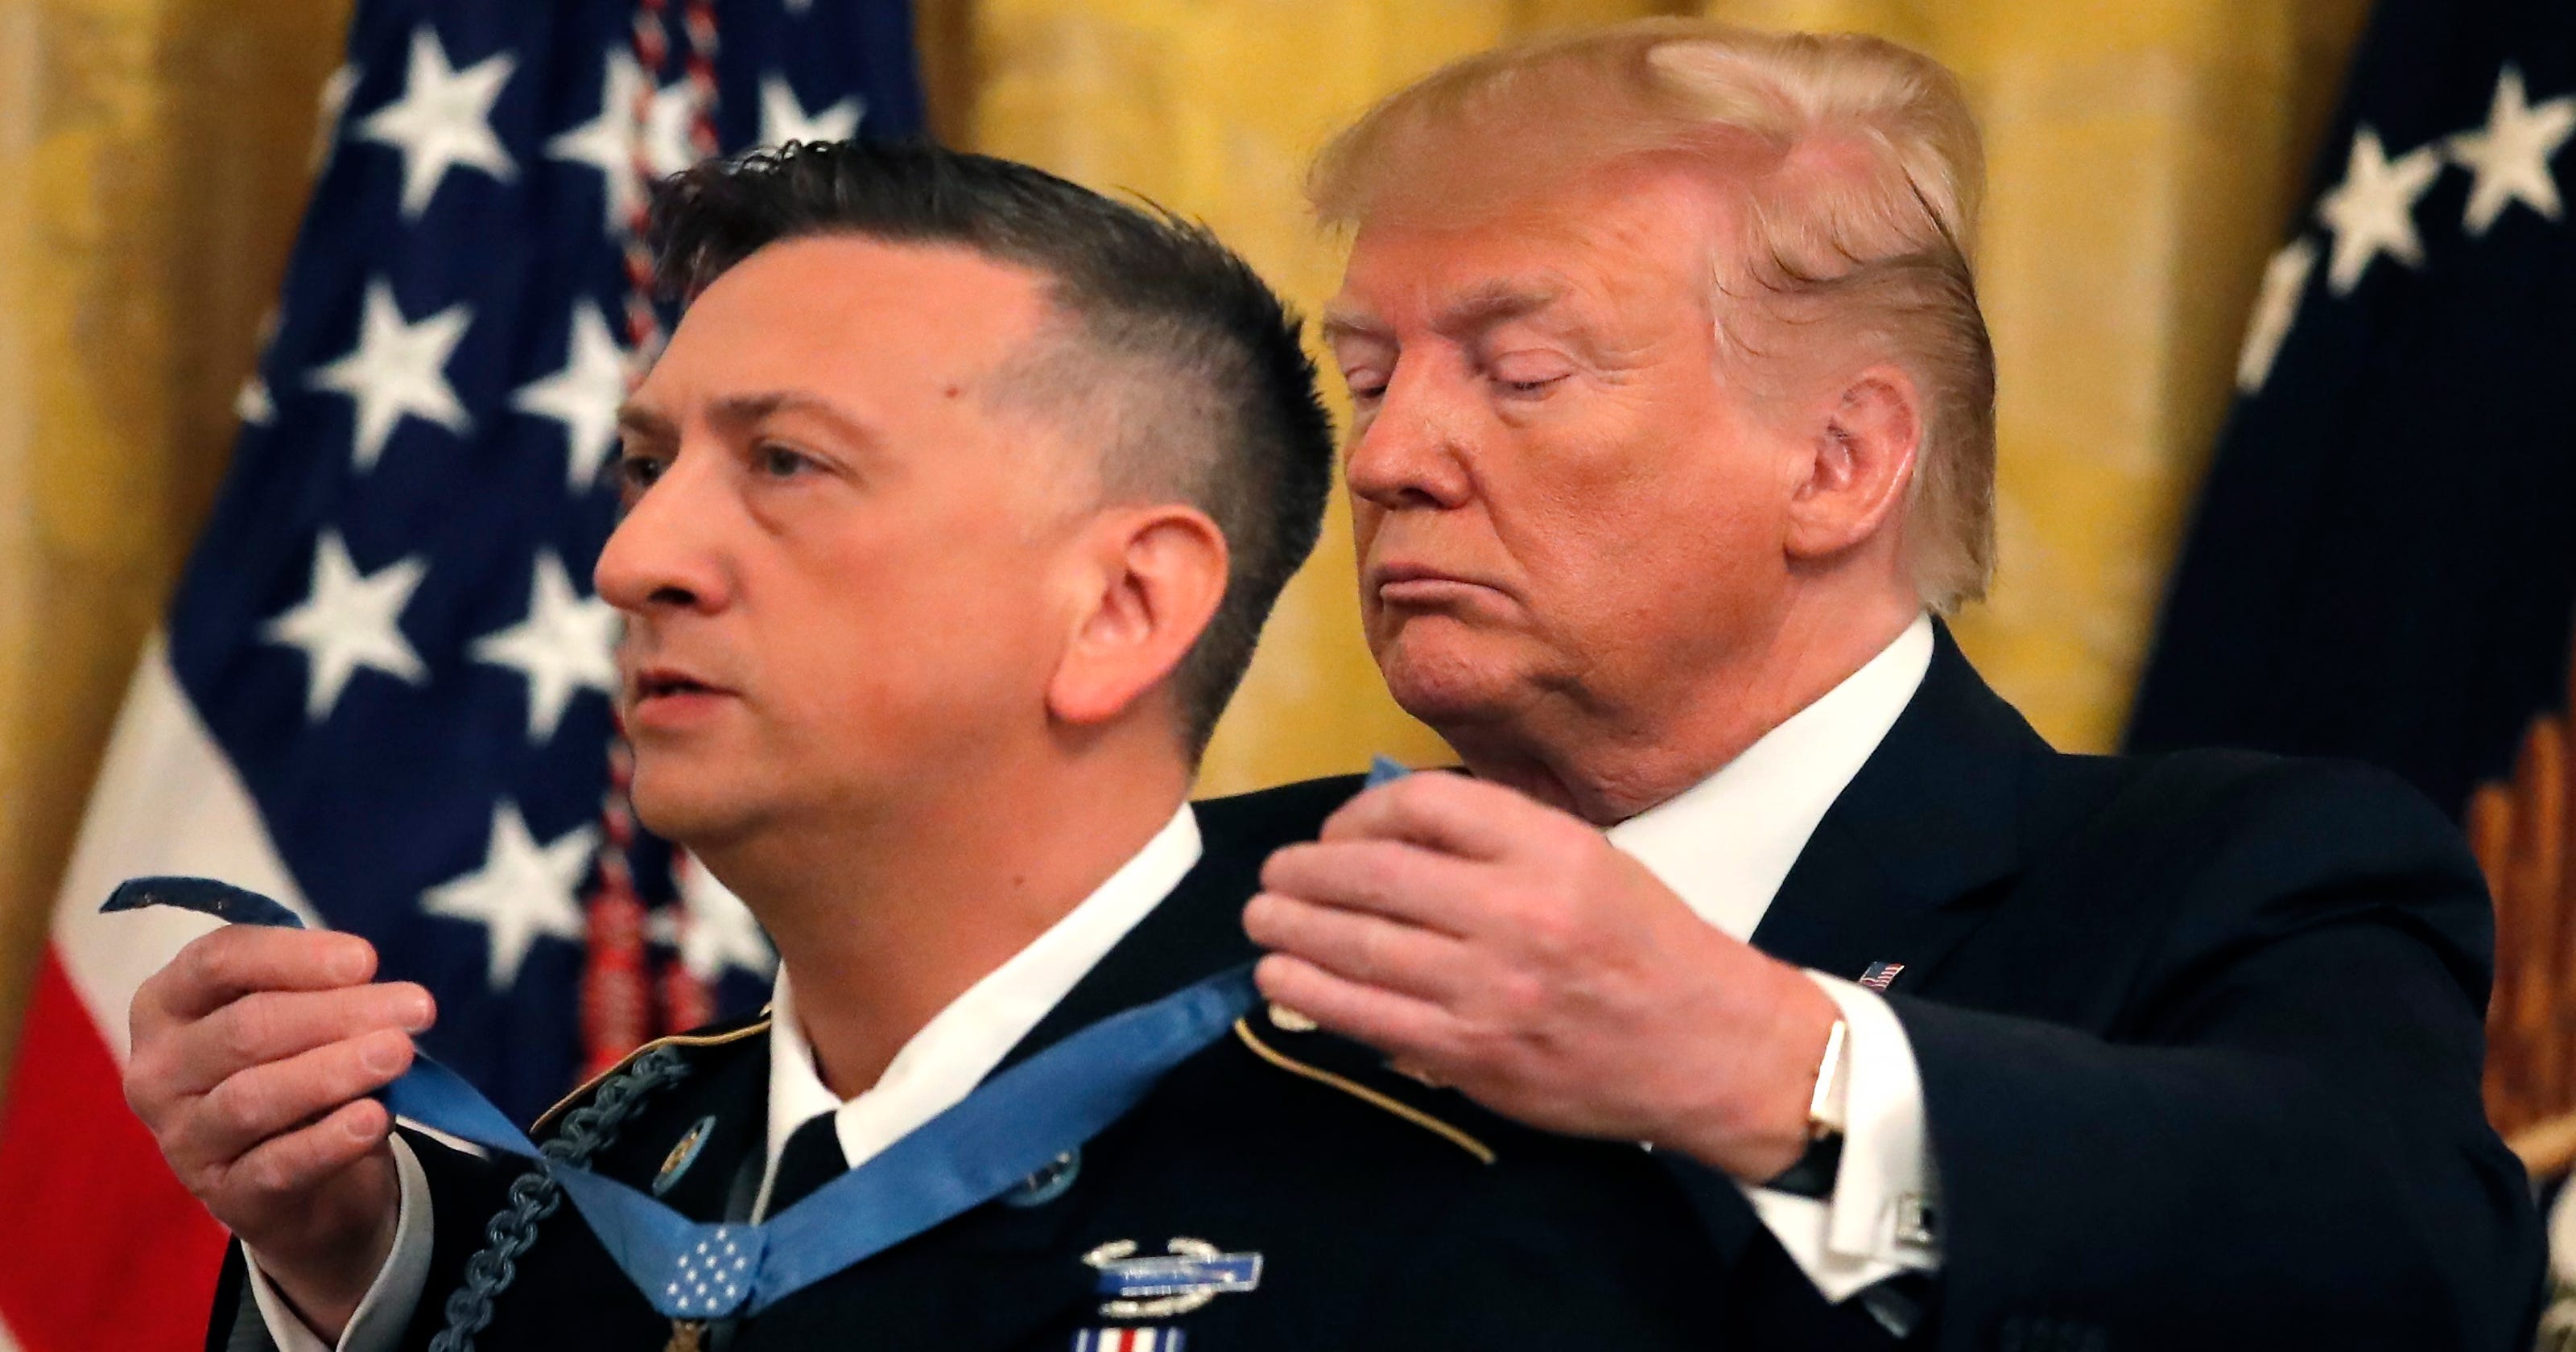 David Bellavia Medal Of Honor Recipient Being Courted For Congress